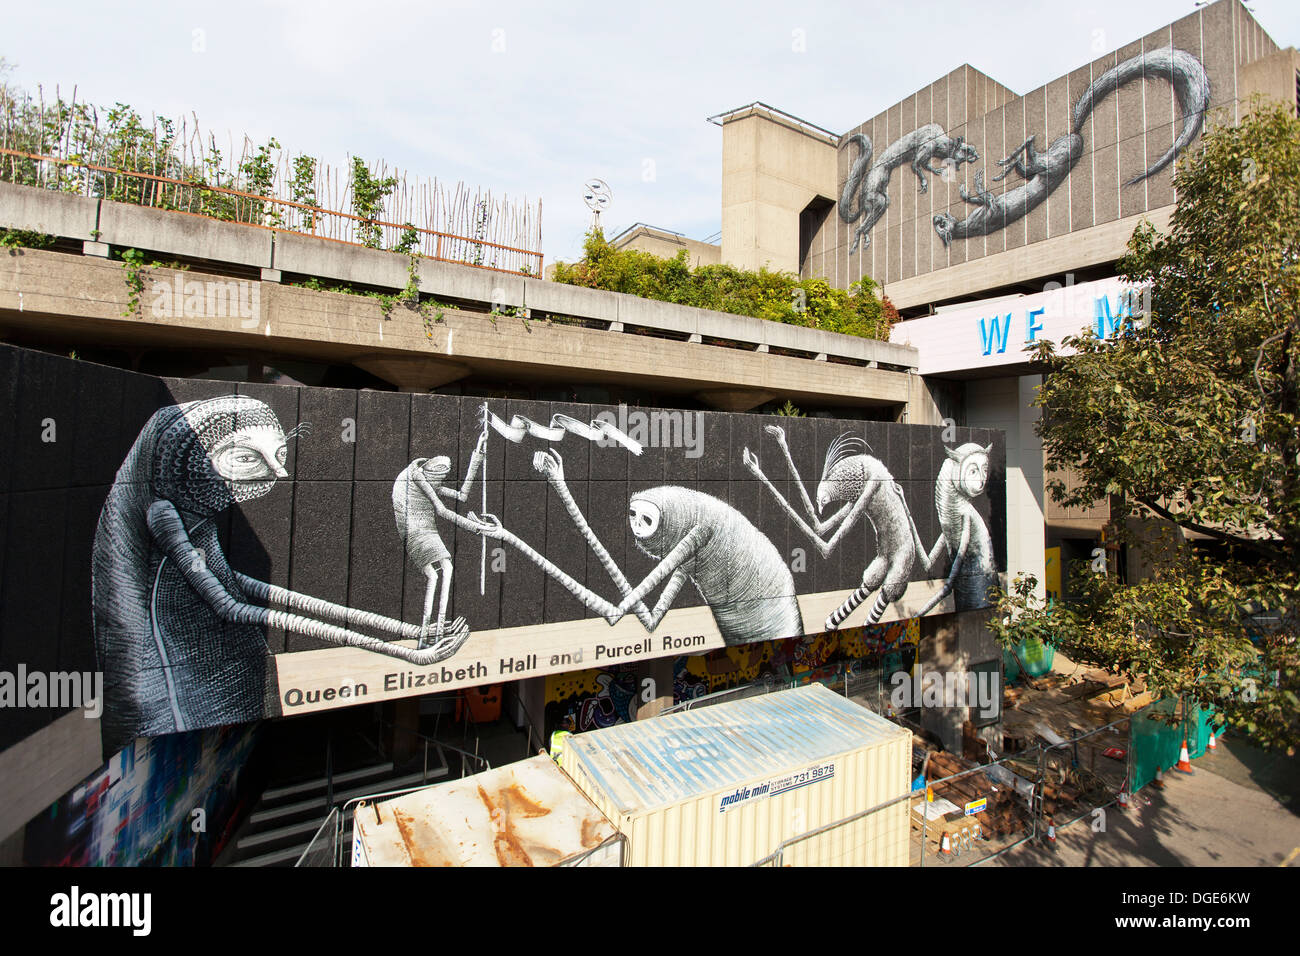 Murals by Phlegm in the foreground & Roa in the background, Queen Elizabeth Hall, Southbank, London. Stock Photo